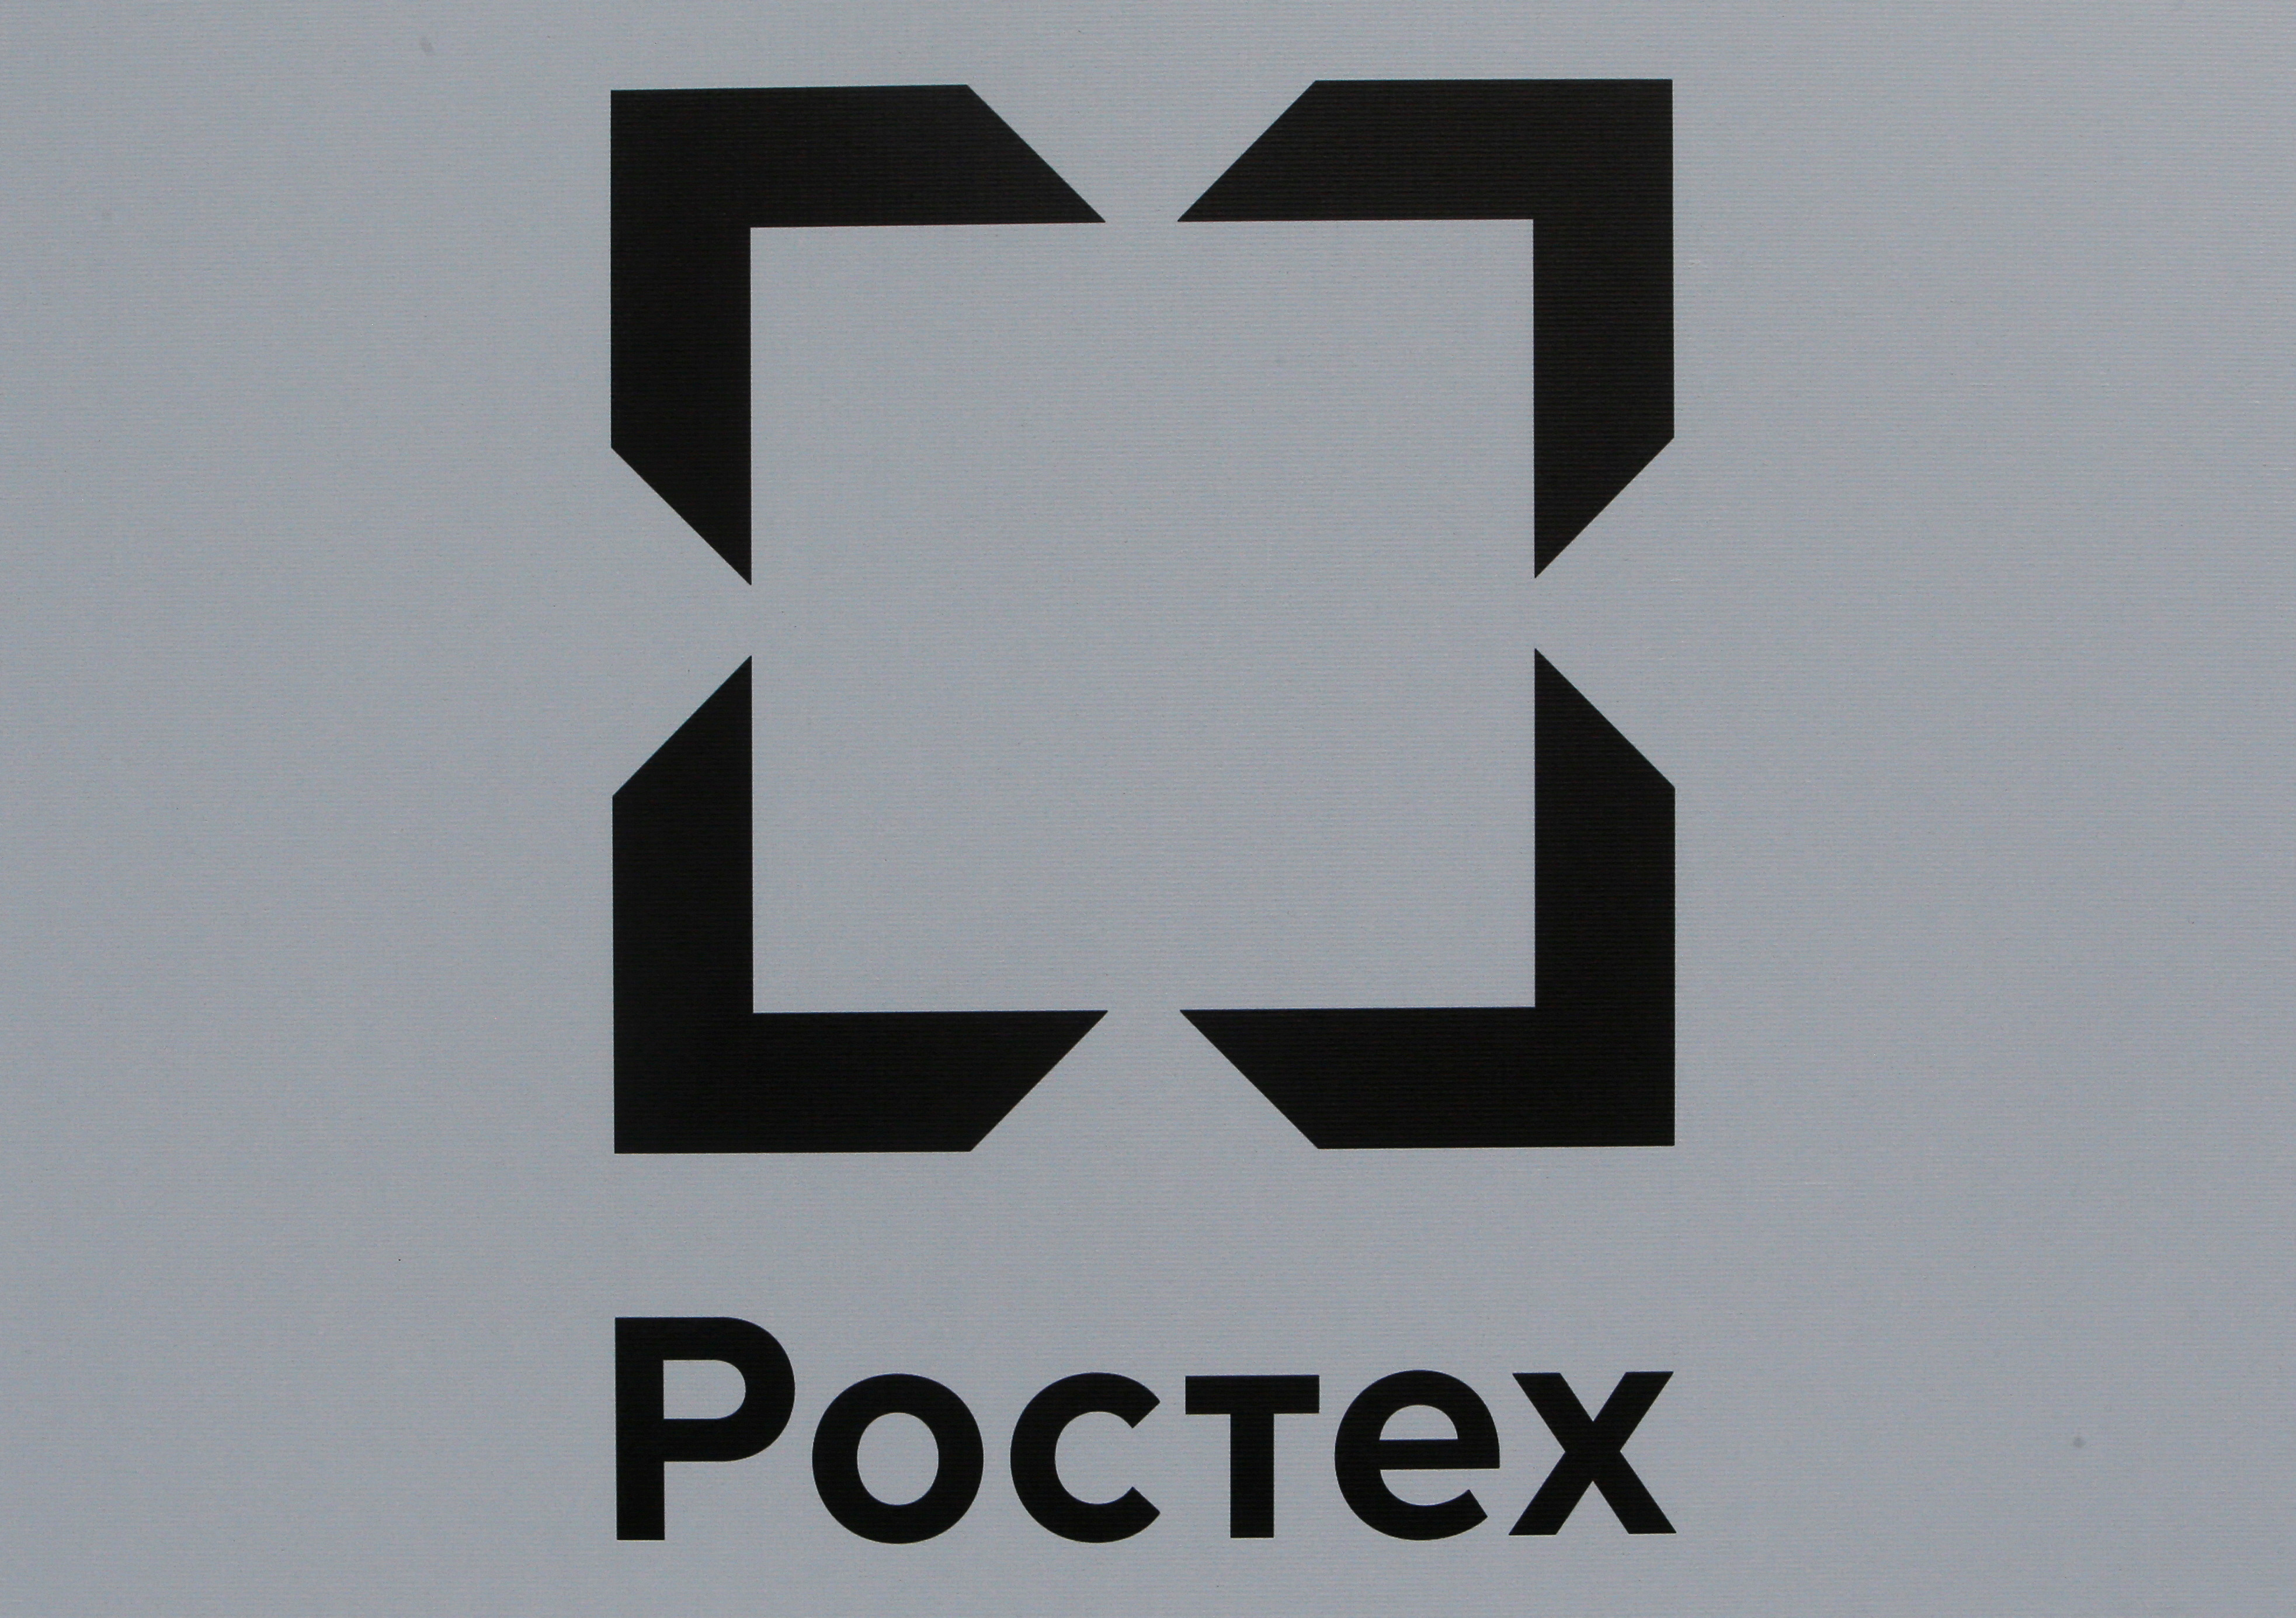 The logo of Russian state defence conglomerate Rostec is seen on a board at the SPIEF 2017 in St. Petersburg